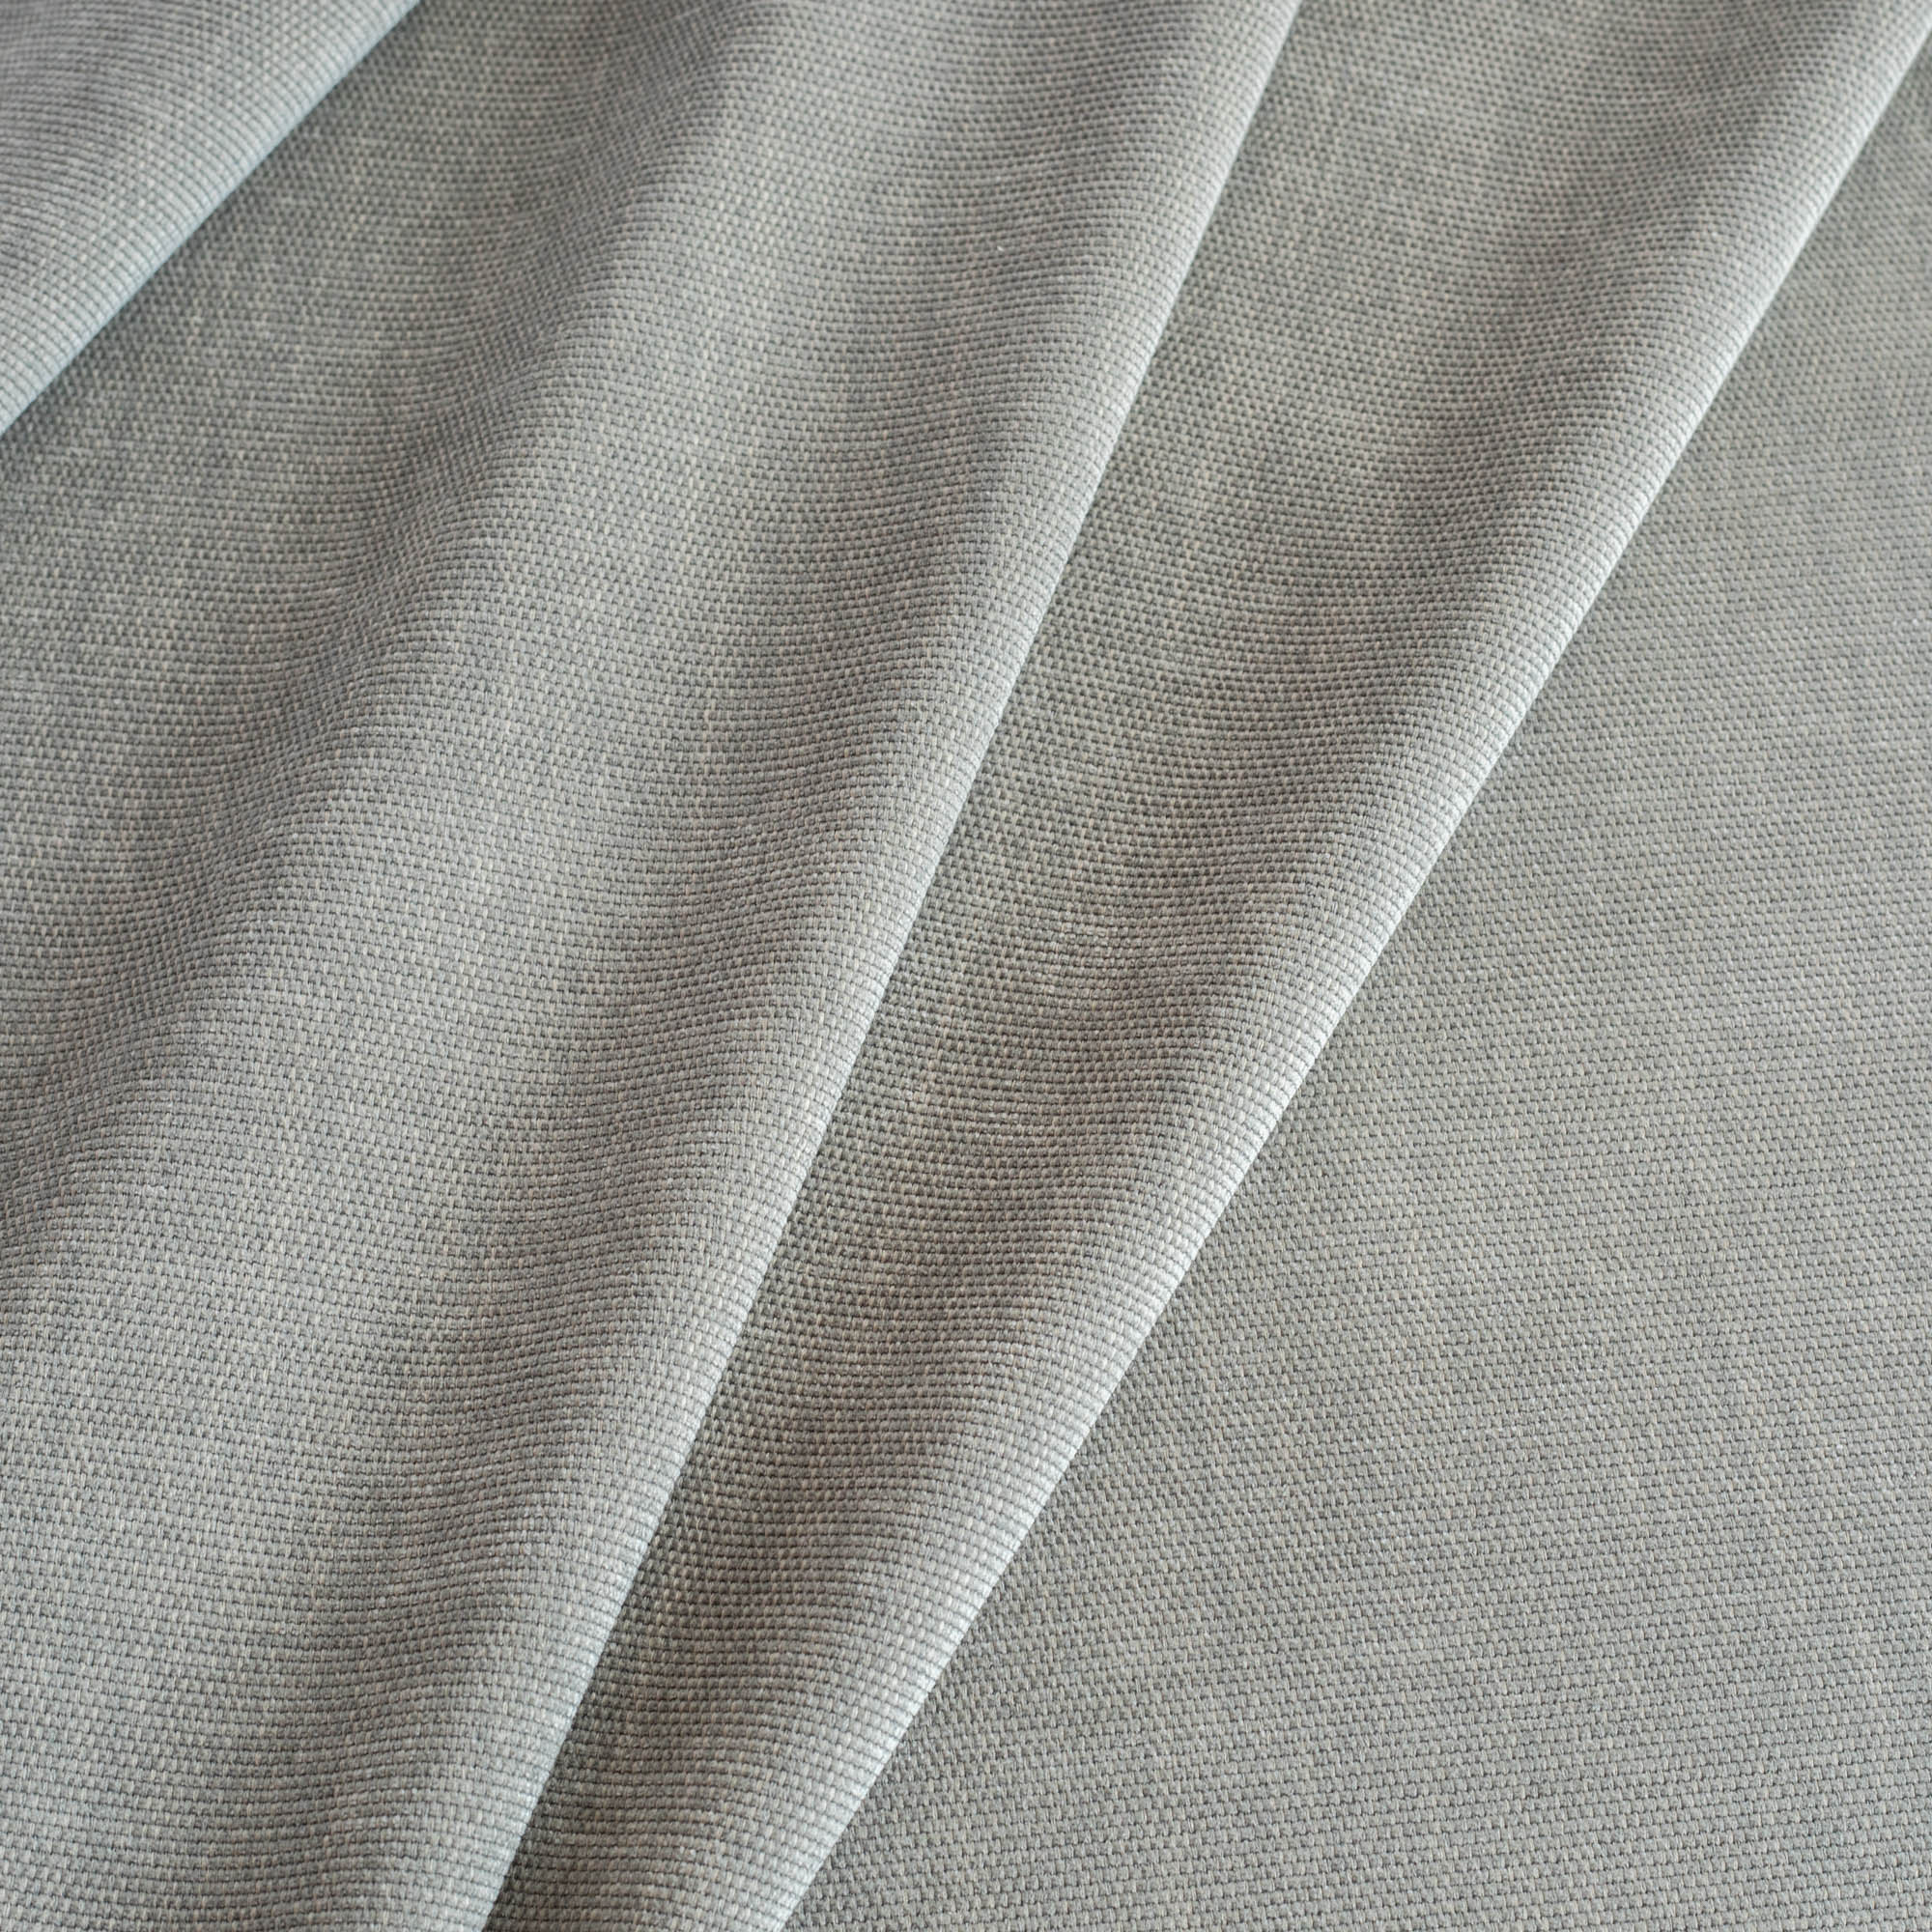 Silver Triacetate Fabric, Shiny Fabric, Shiny Material, Silver Fabric,  Flowy Fabric, Pillow Cover Fabric, Upholstery Fabric, Remnant Fabric 